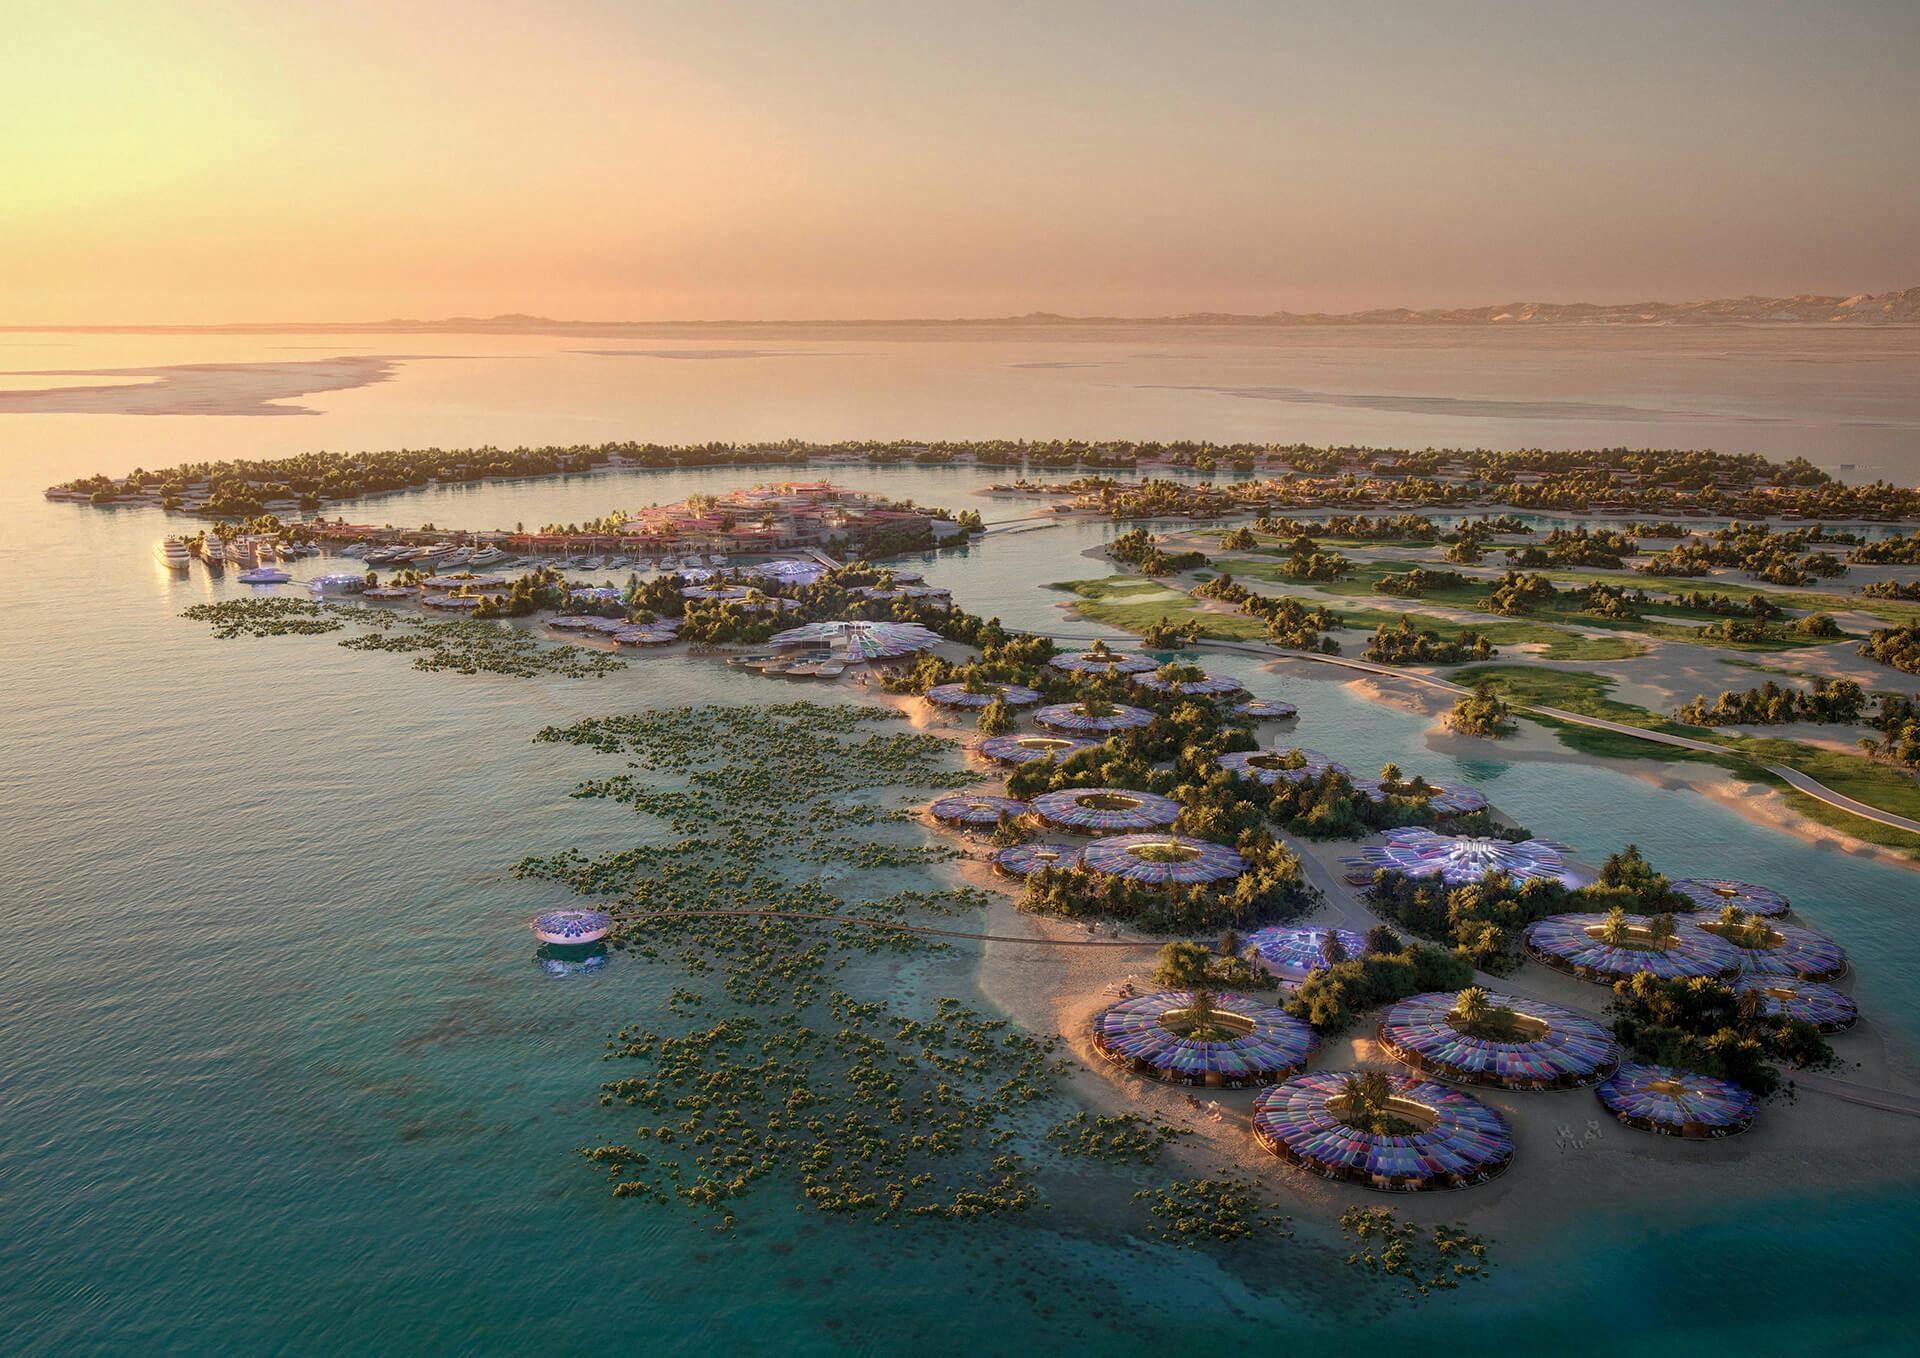 The Equinox Founding Partners supported Foster+Partners in developing the sustainability concept for the Coral Bloom Resort masterplan on Shurayrah Island.